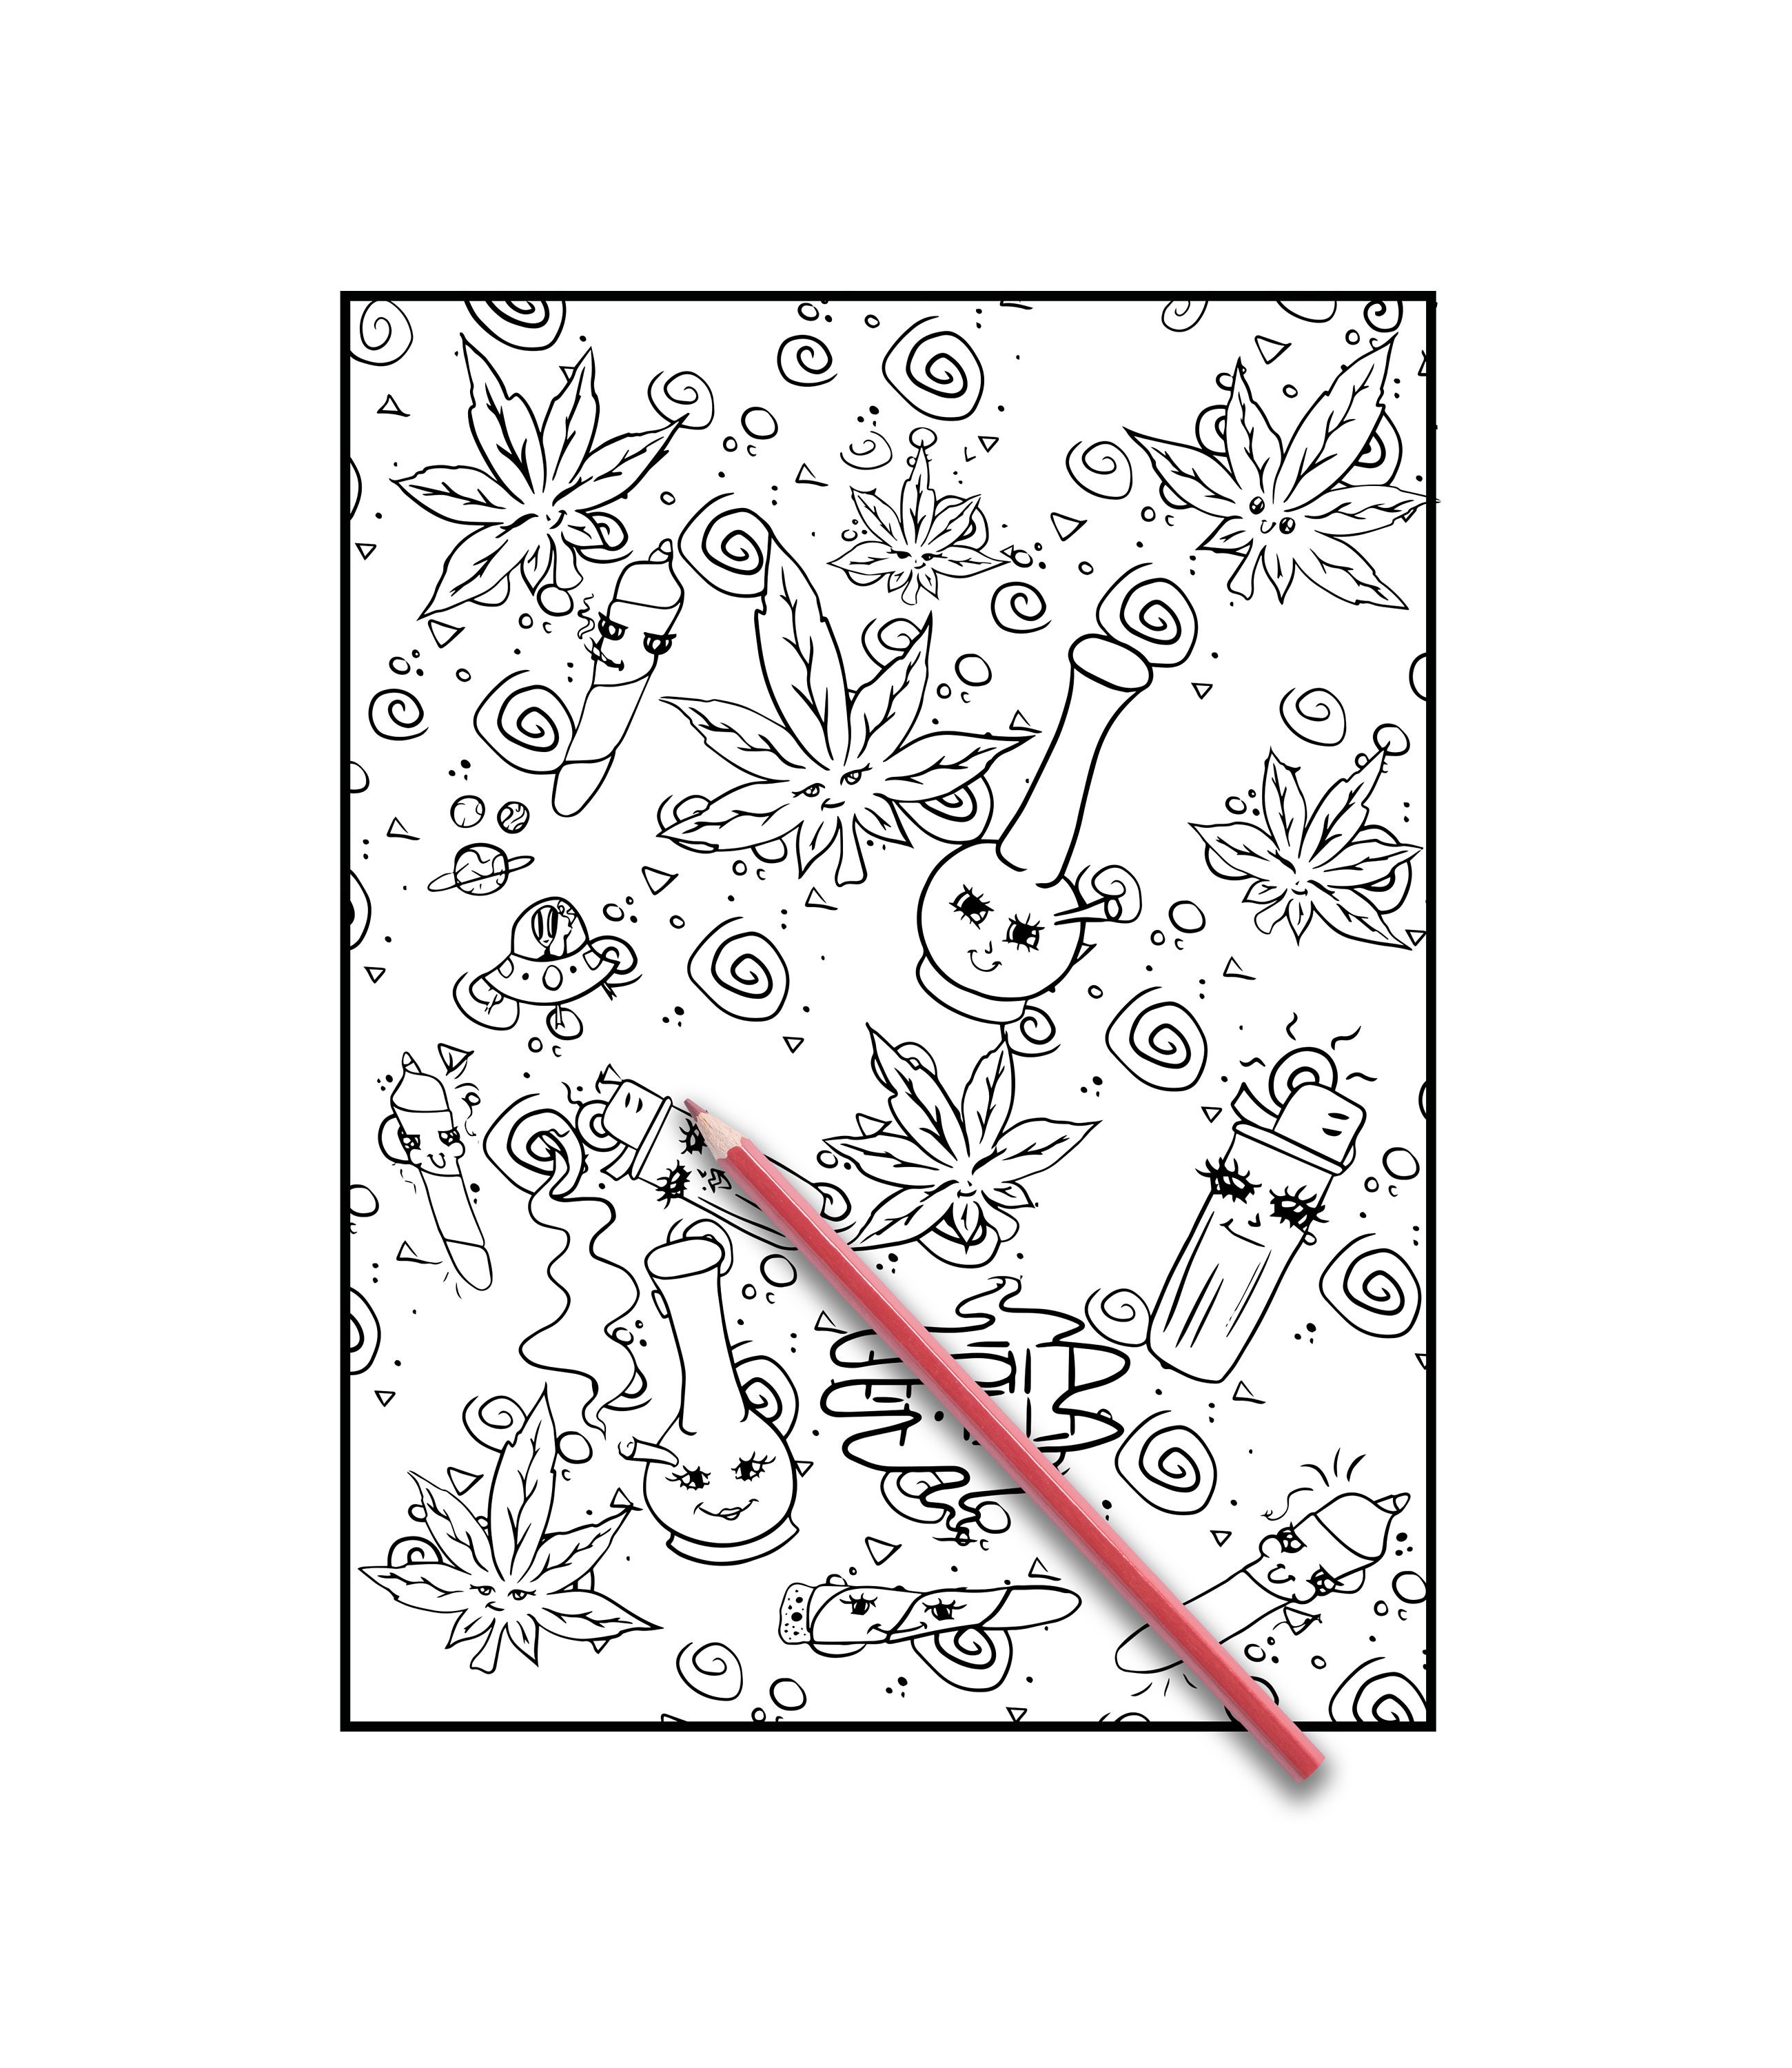 Stoner Coloring Page Colouring Page for Adults Stoner   Etsy